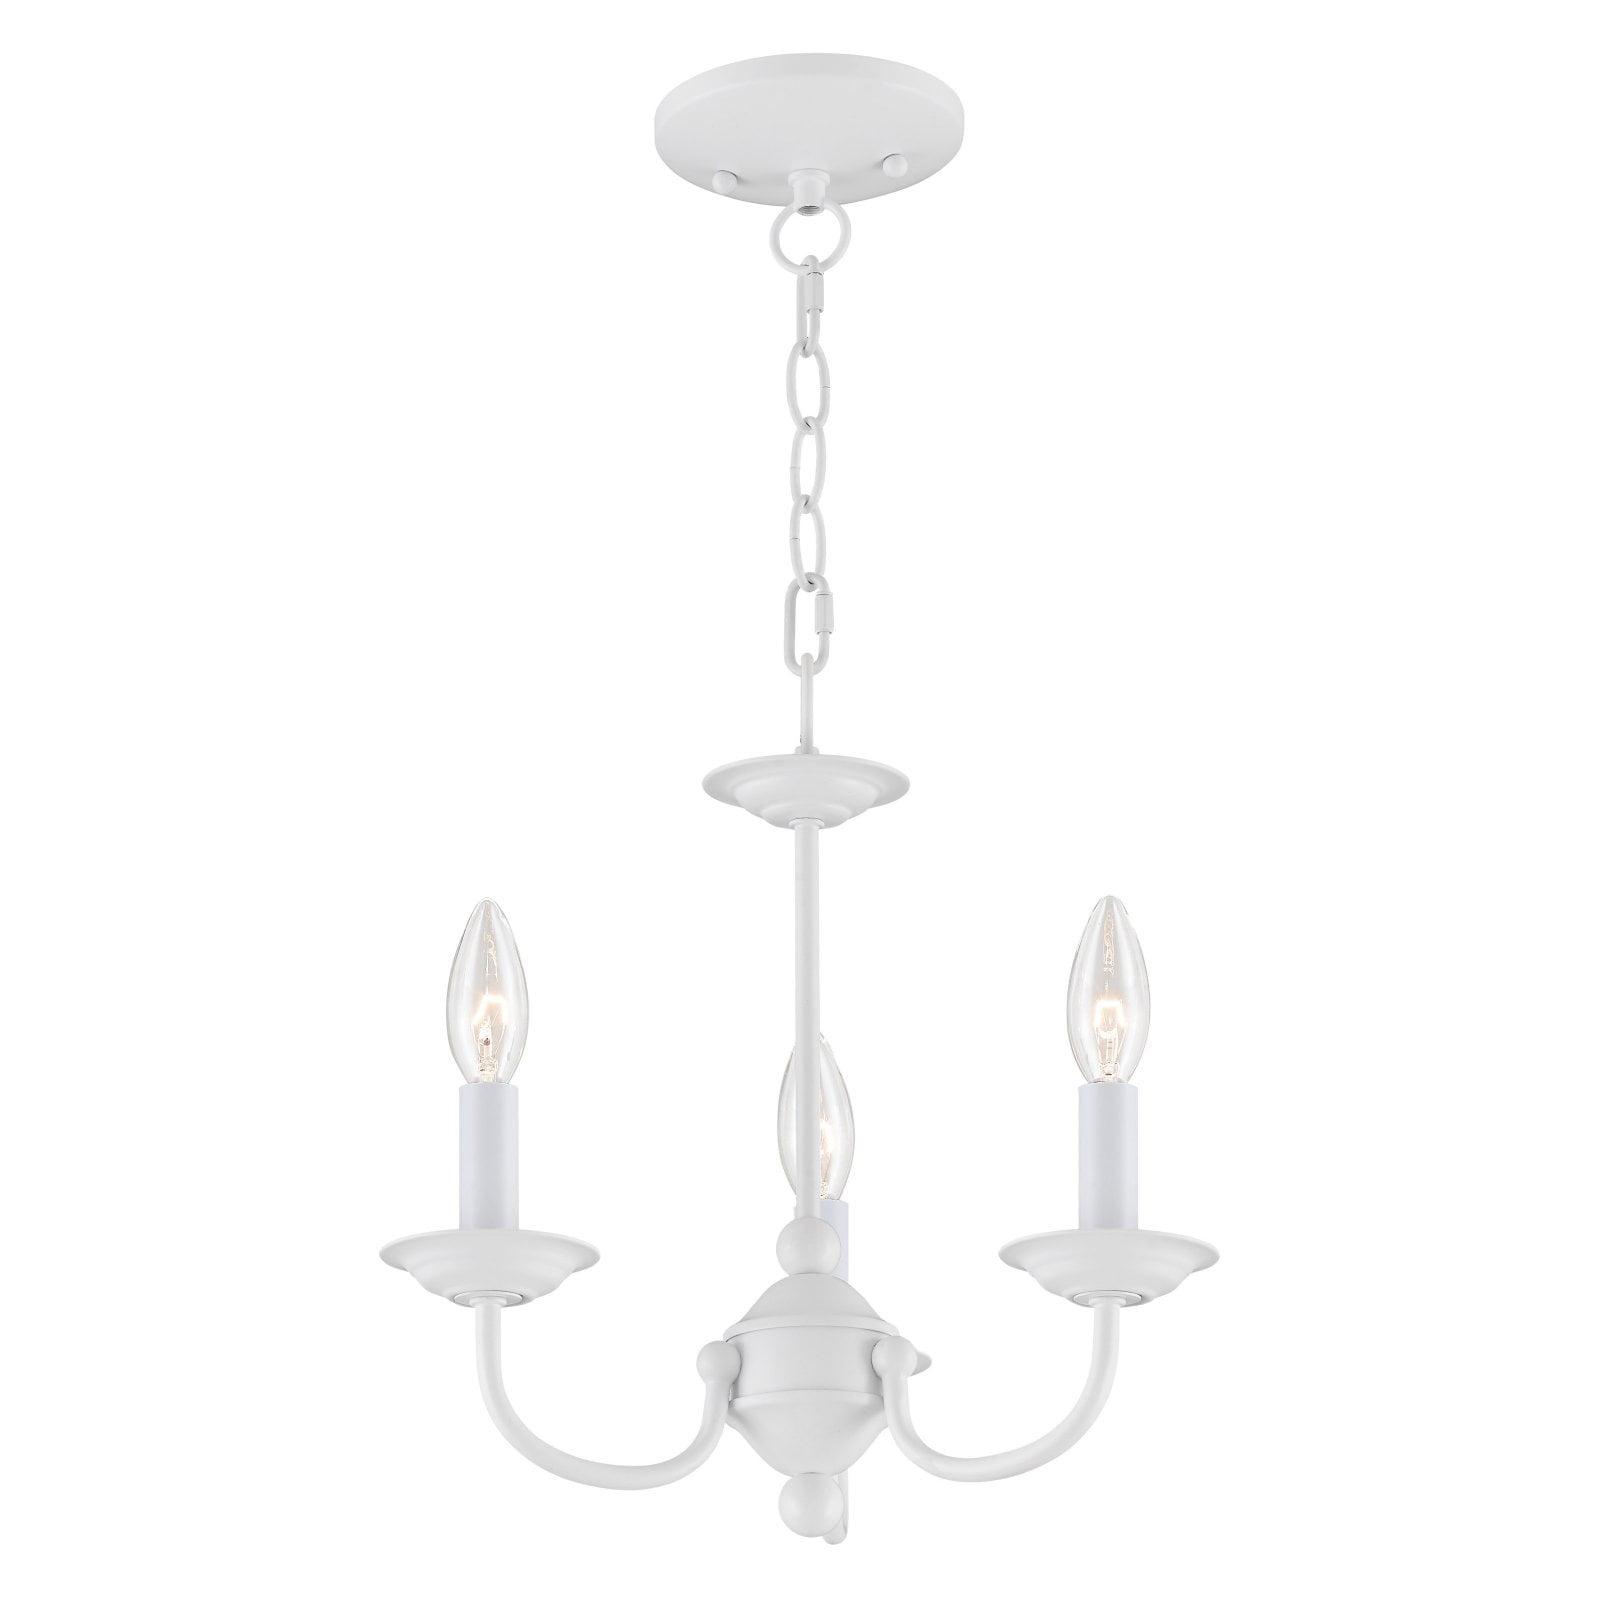 Elegant Mini 3-Light Candle Chandelier in Classic White